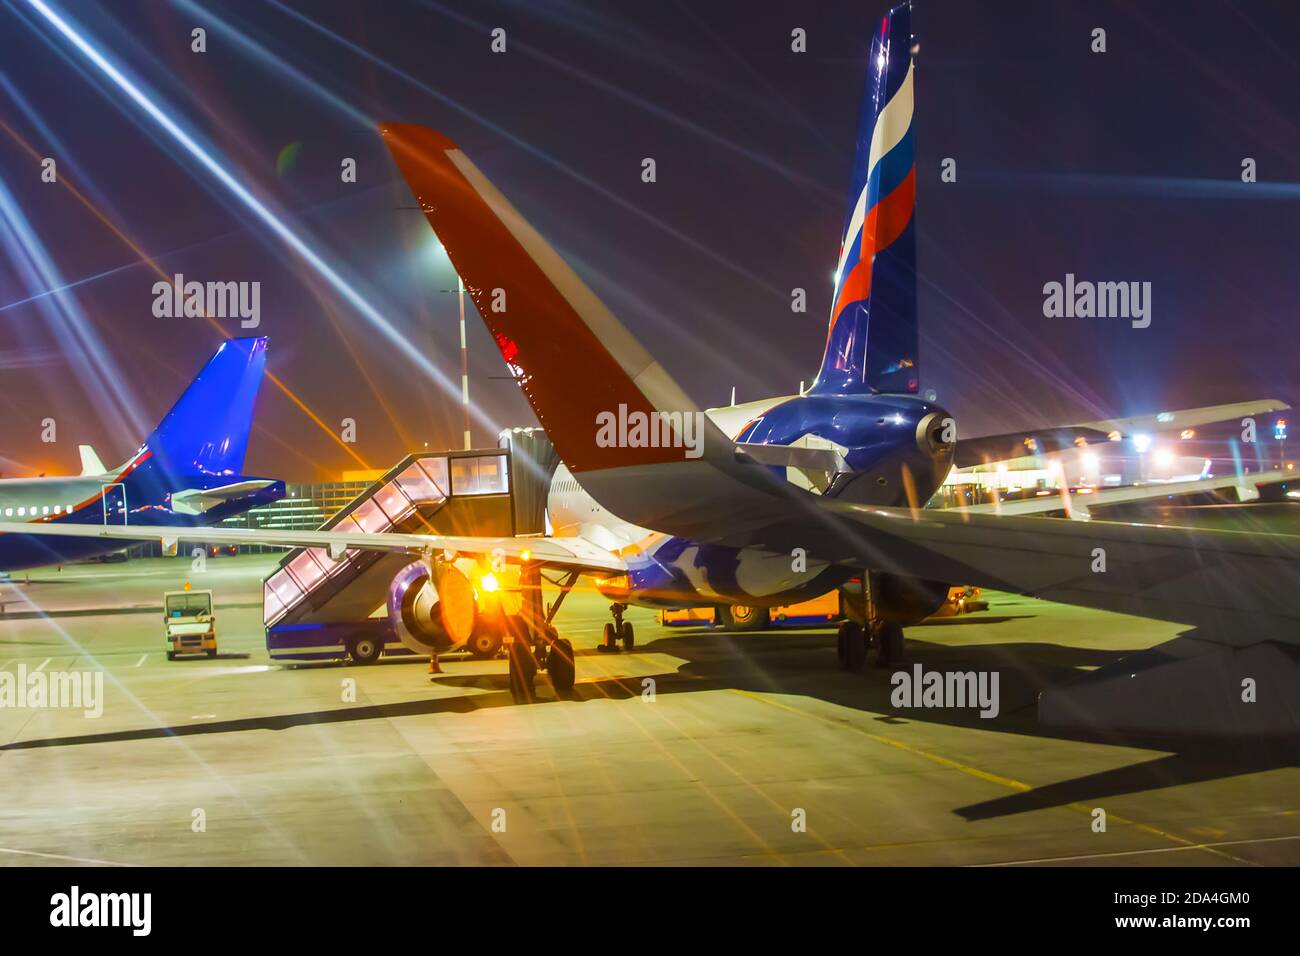 loading passenger aircraft at the airport before departure Stock Photo